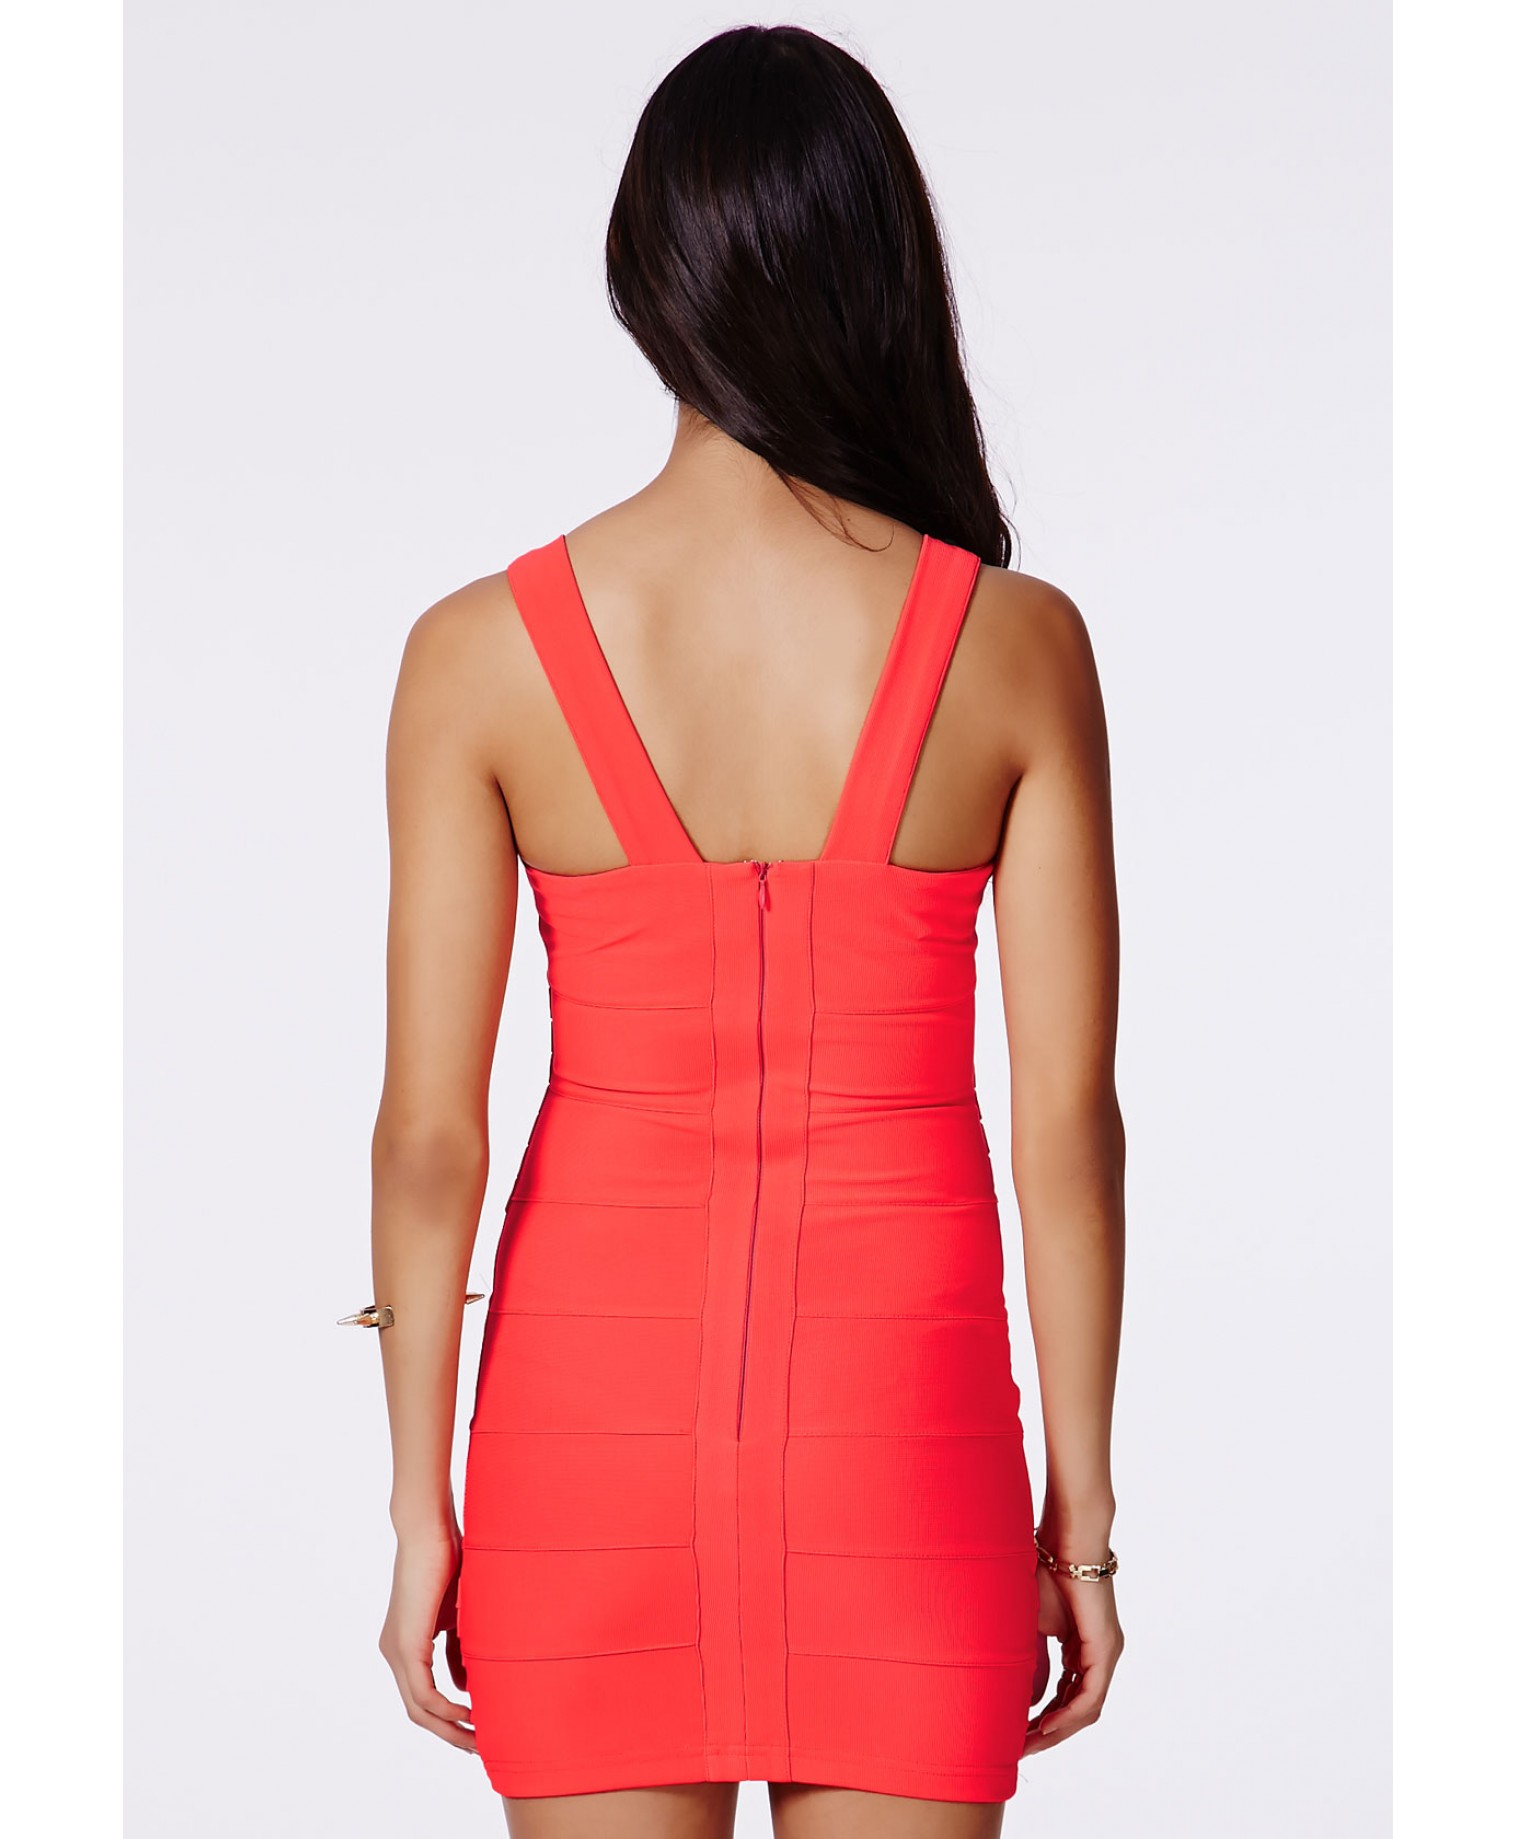 Missguided Leena Neon Coral Bandage Bodycon Dress in Pink (coral) | Lyst